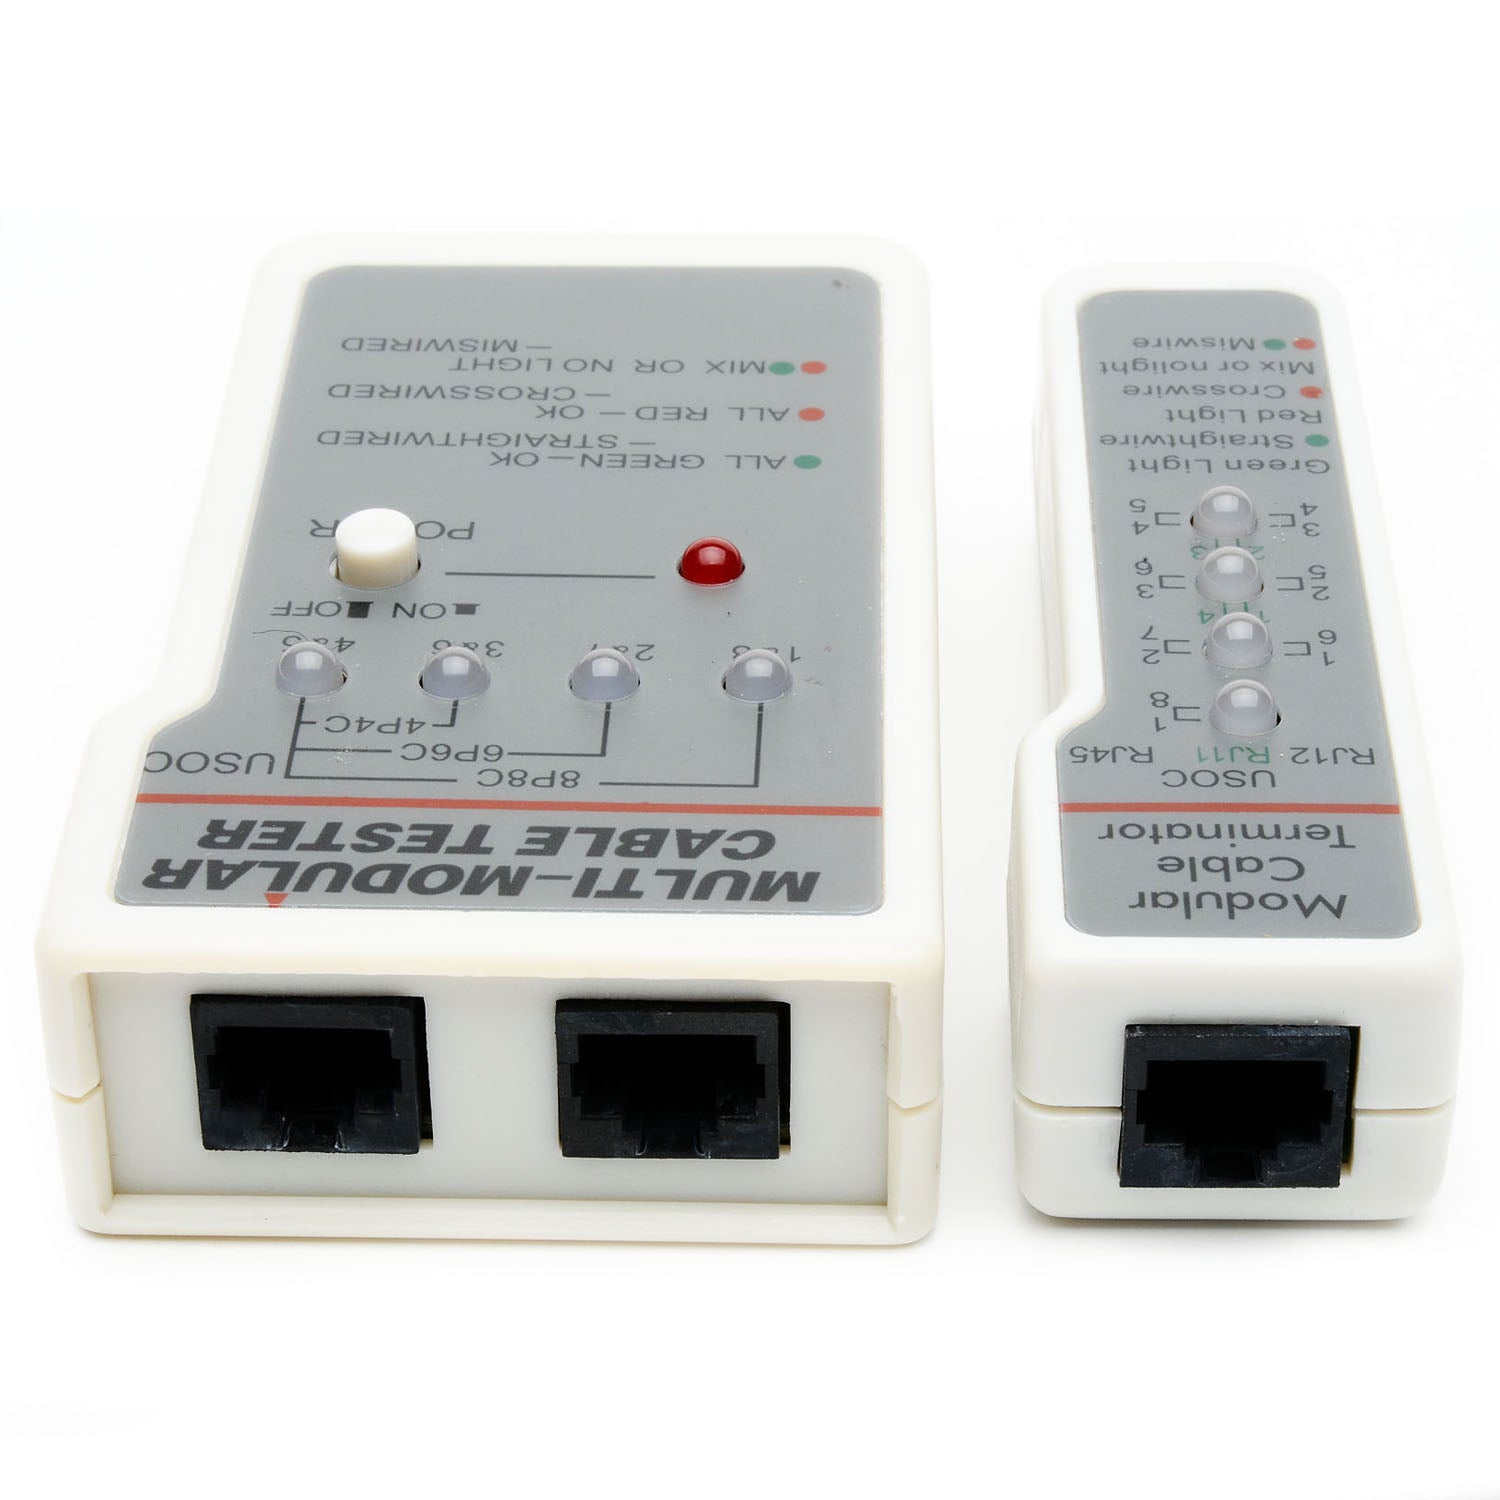 60-CT4 Net cable tester RJ45